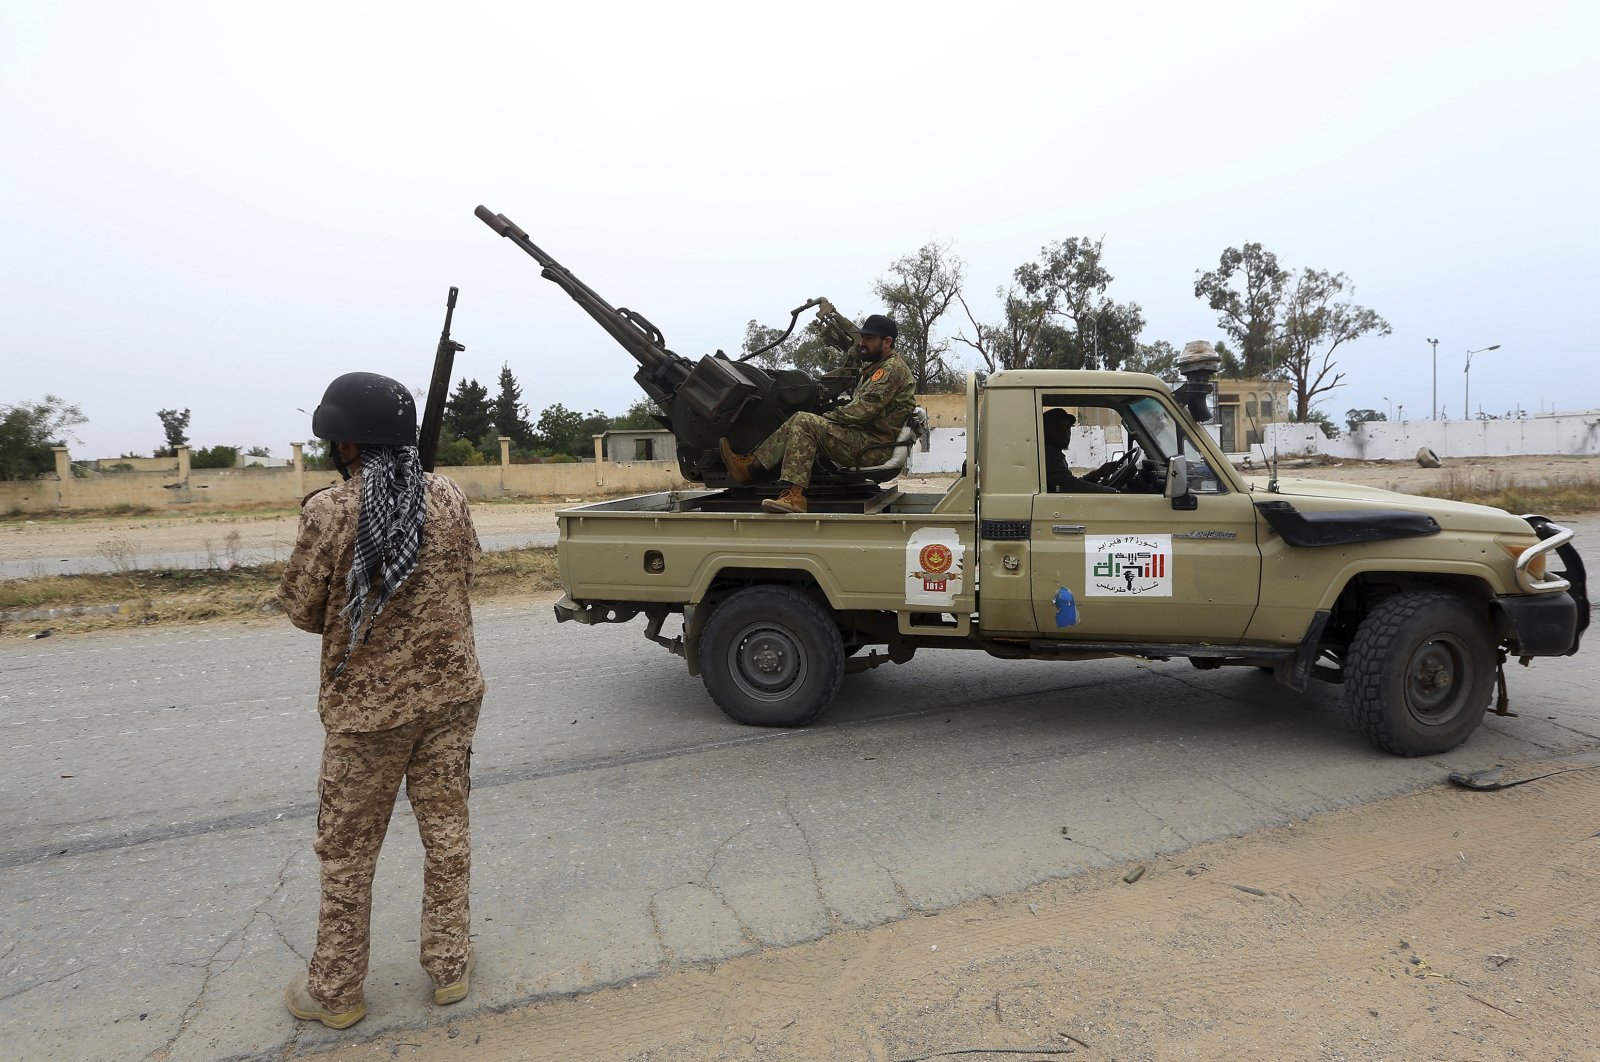 Libya's internationally recognized Government of National Accord (GNA) forces clash with putschist Gen. Khalifa Haftar's militias, south of the capital Tripoli, Libya, May 21, 2019. (AP Photo)